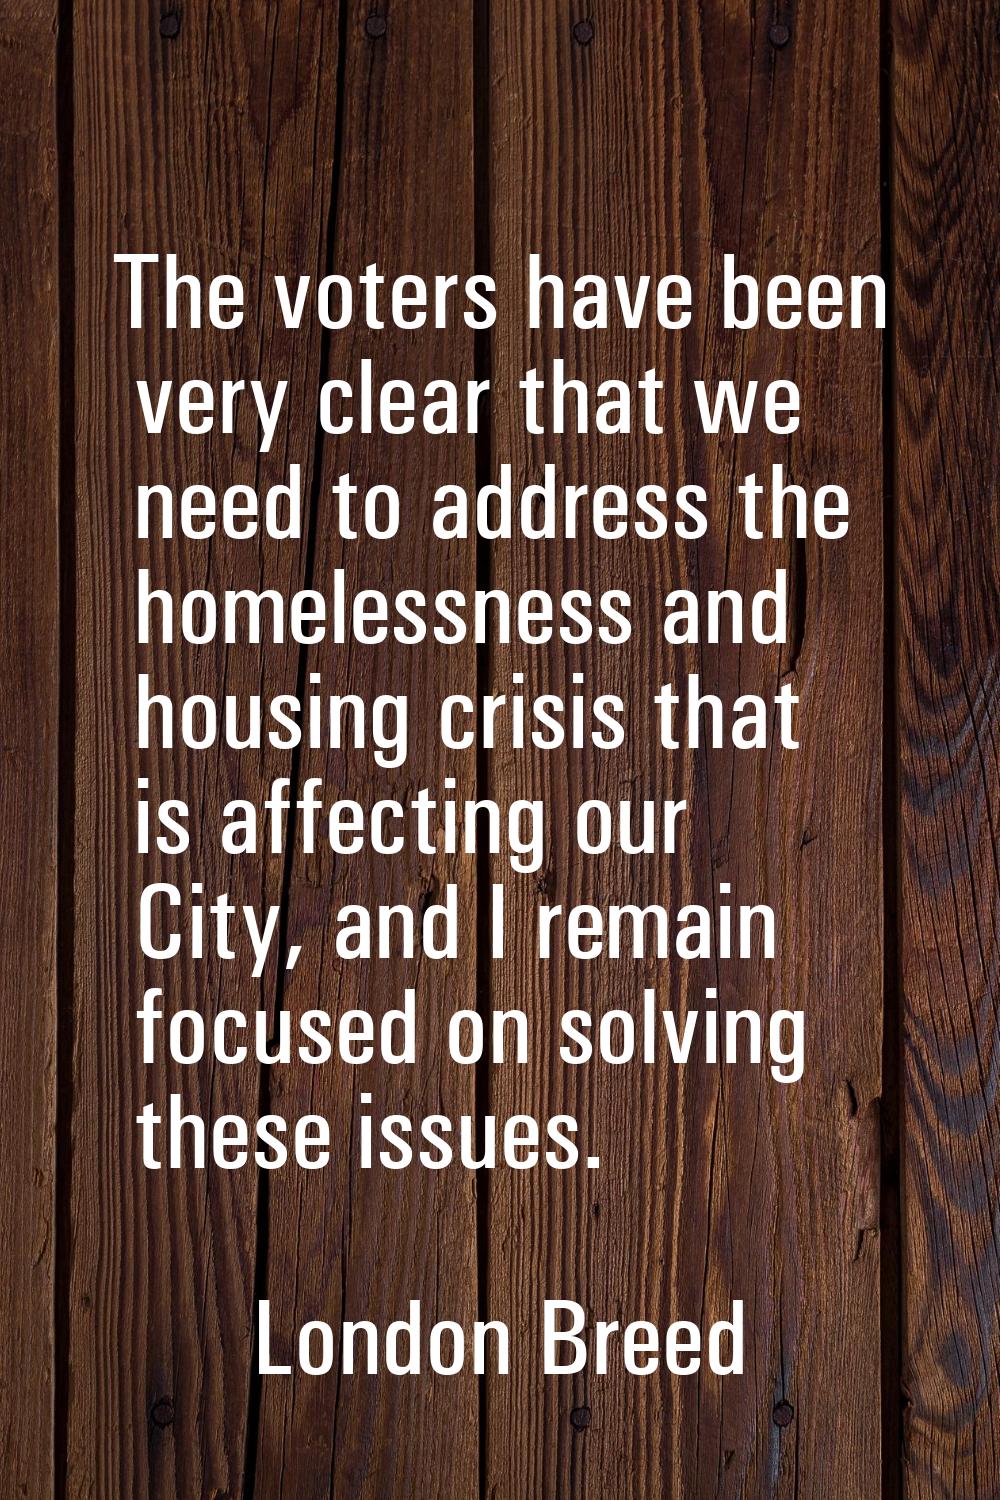 The voters have been very clear that we need to address the homelessness and housing crisis that is